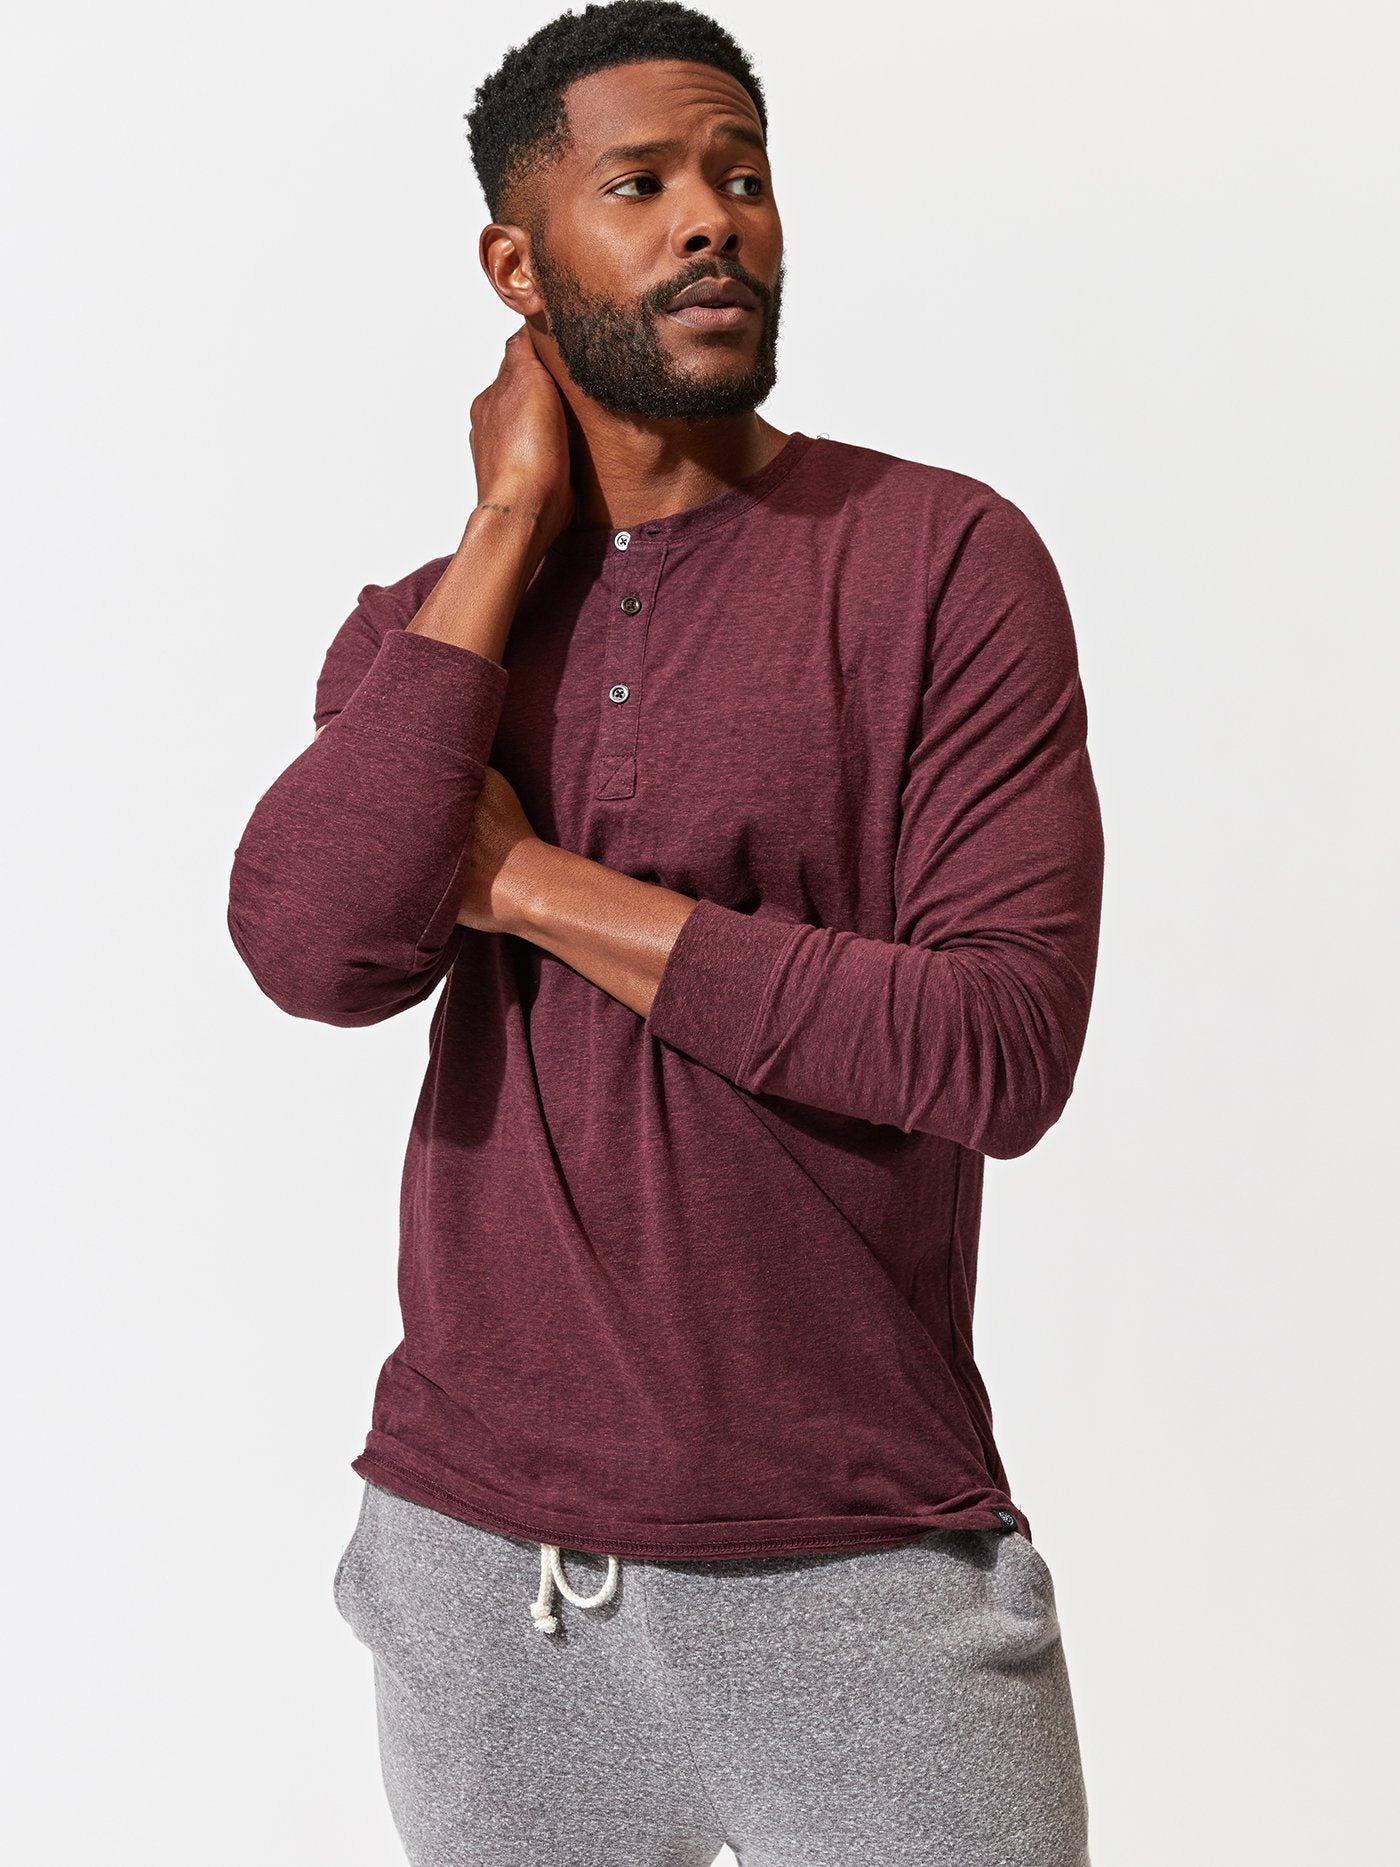 Triblend Long Sleeve Henley Mens Tops Threads 4 Thought